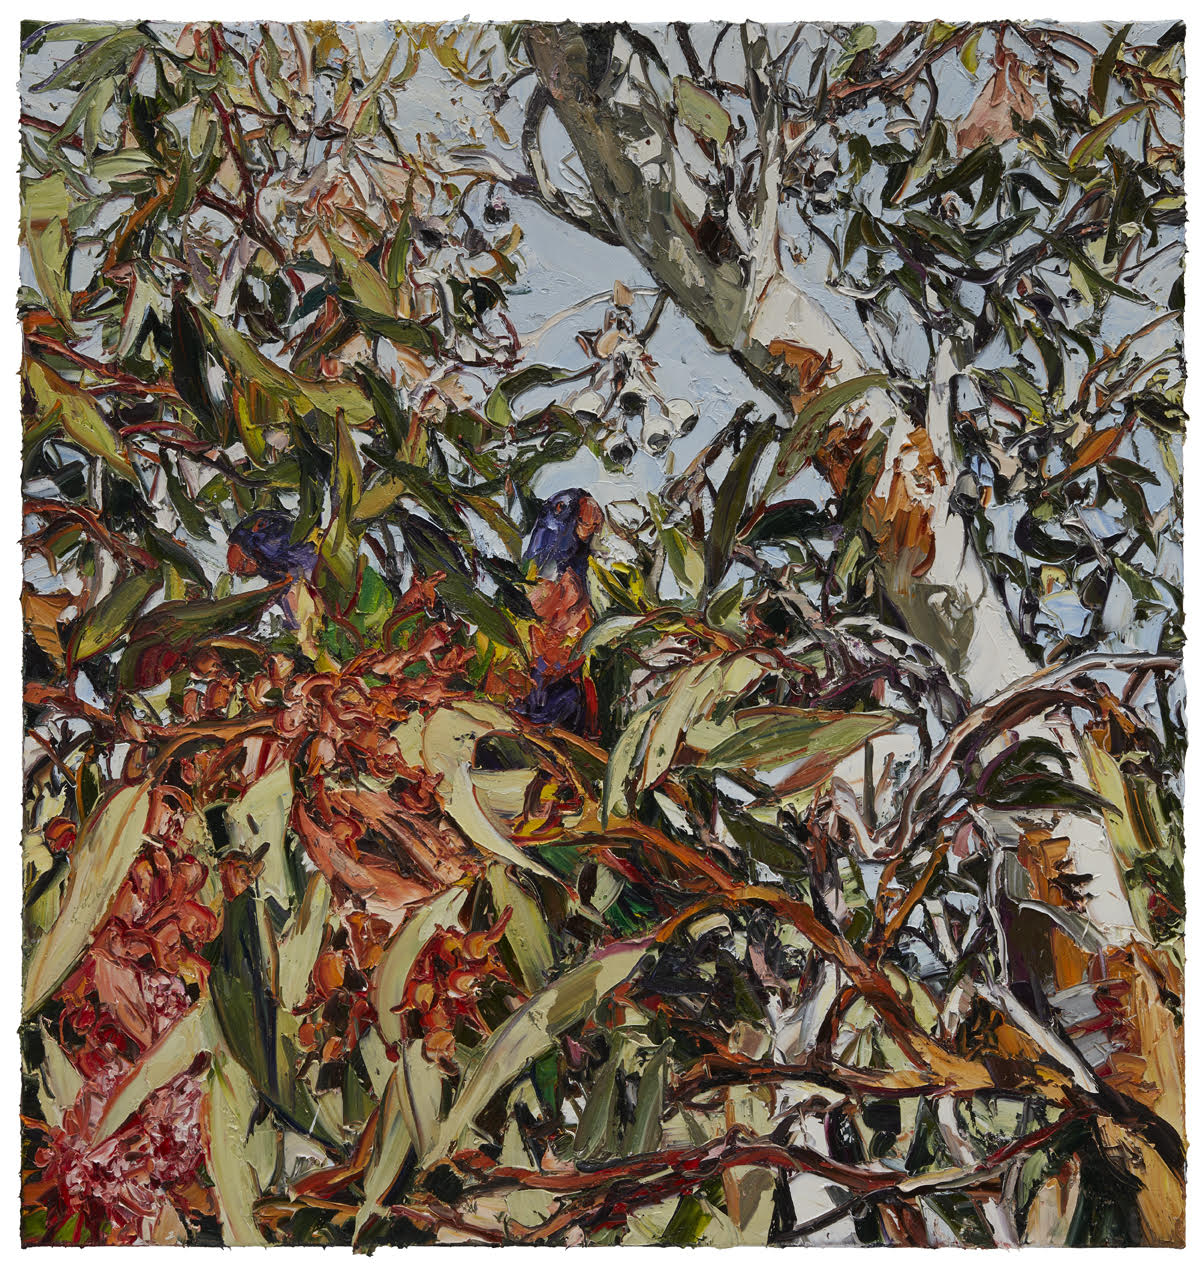 Two Rosellas and Grevilea. by Nicholas Harding at Olsen Gallery